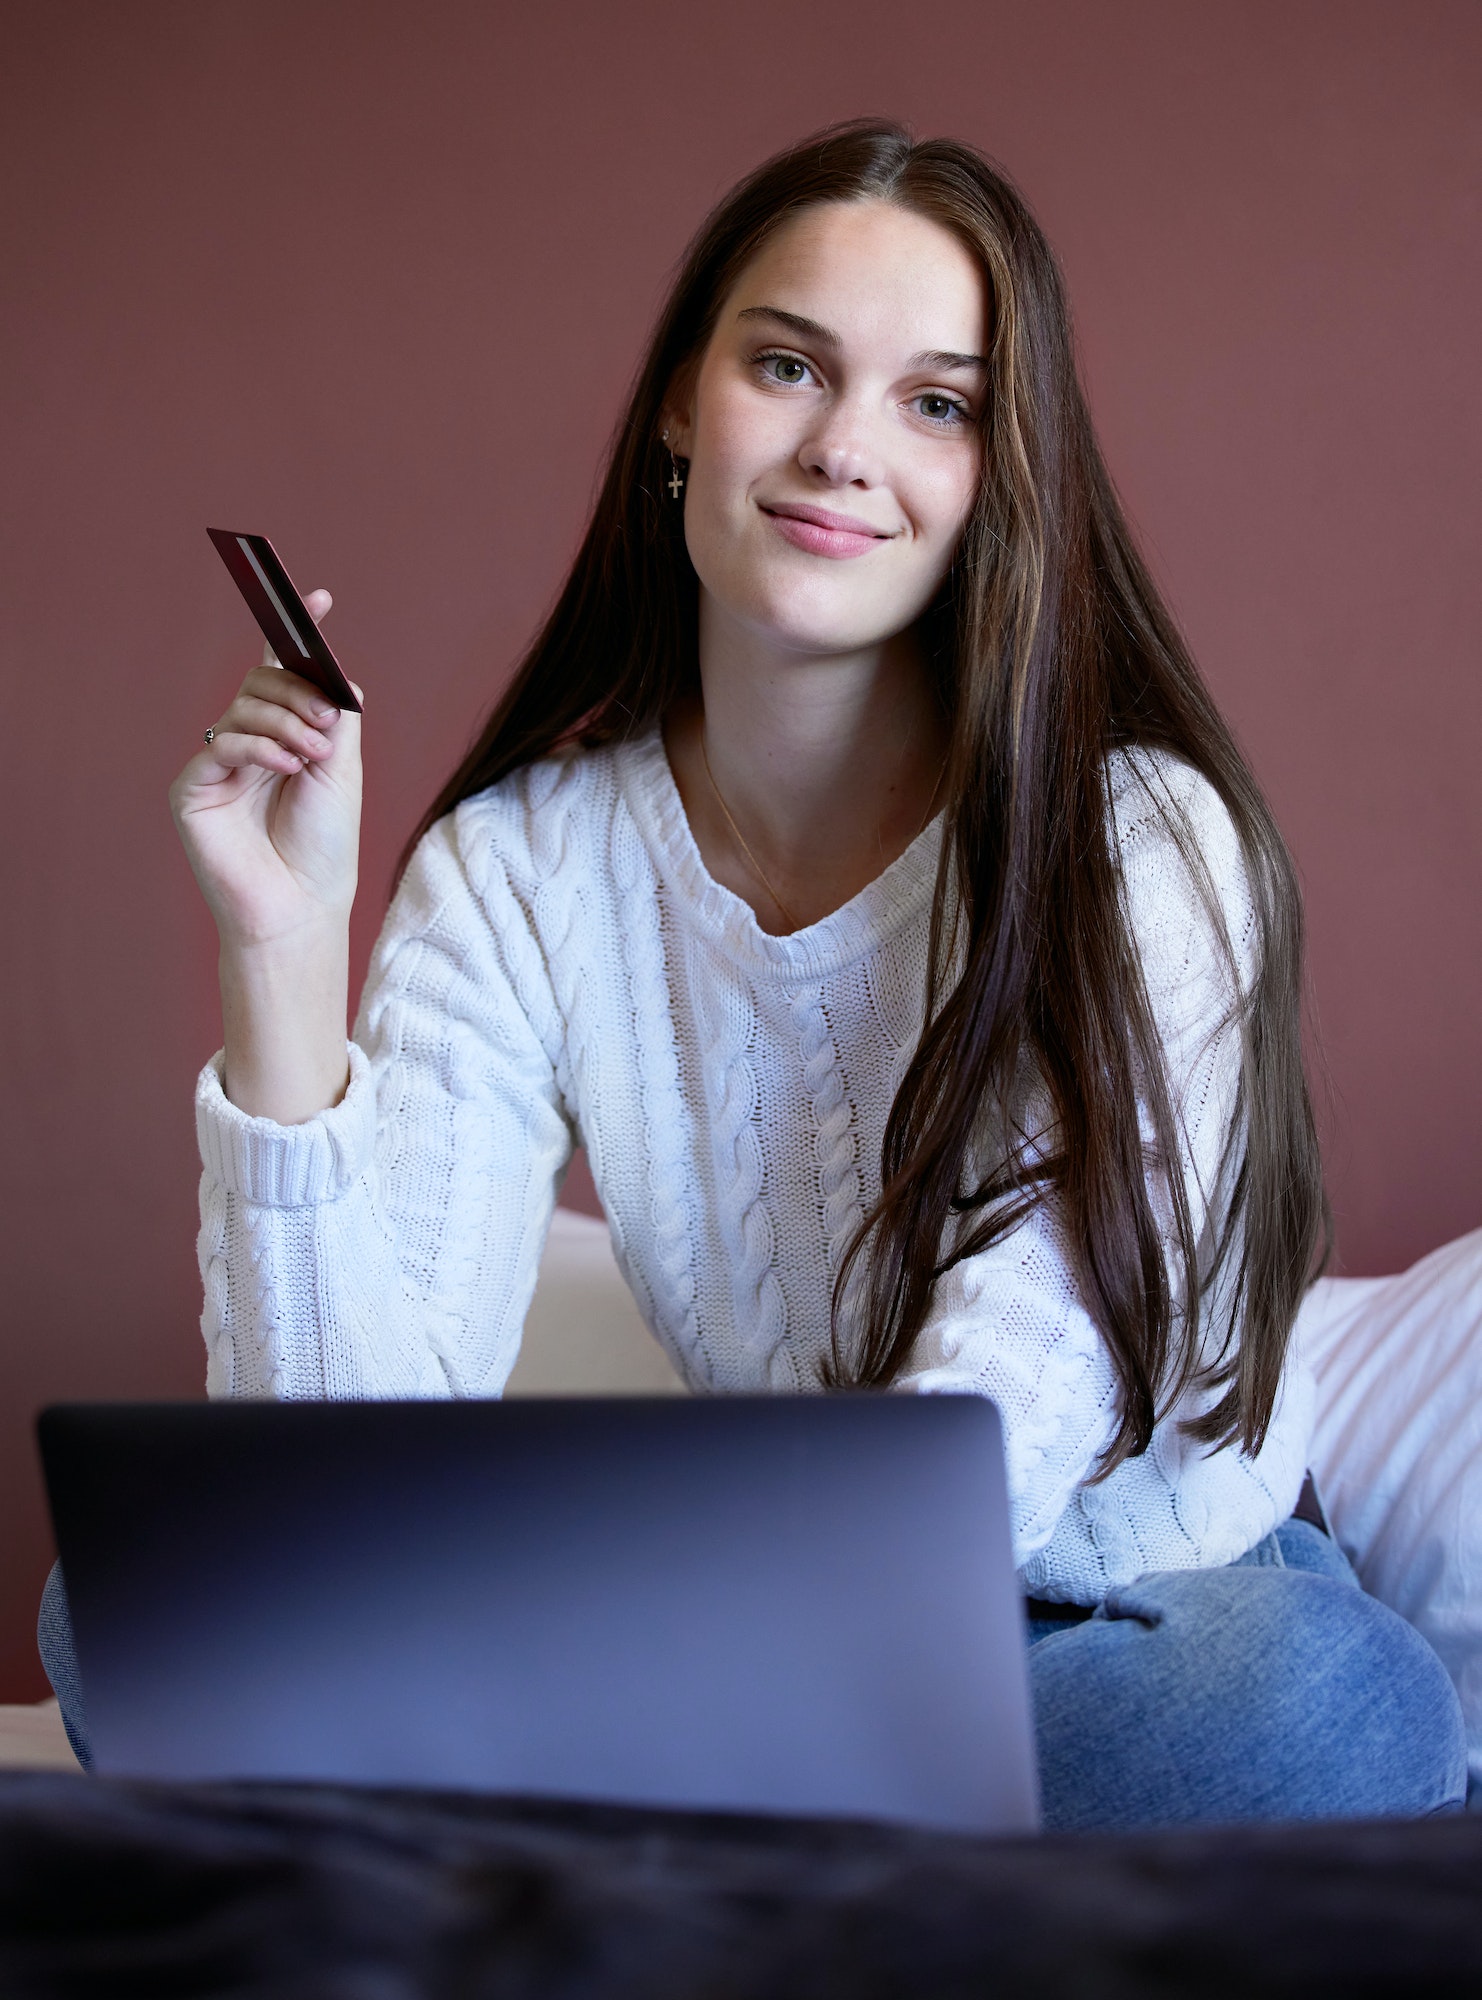 Debt free and happier than ever. Shot of a young woman shopping online using her laptop.